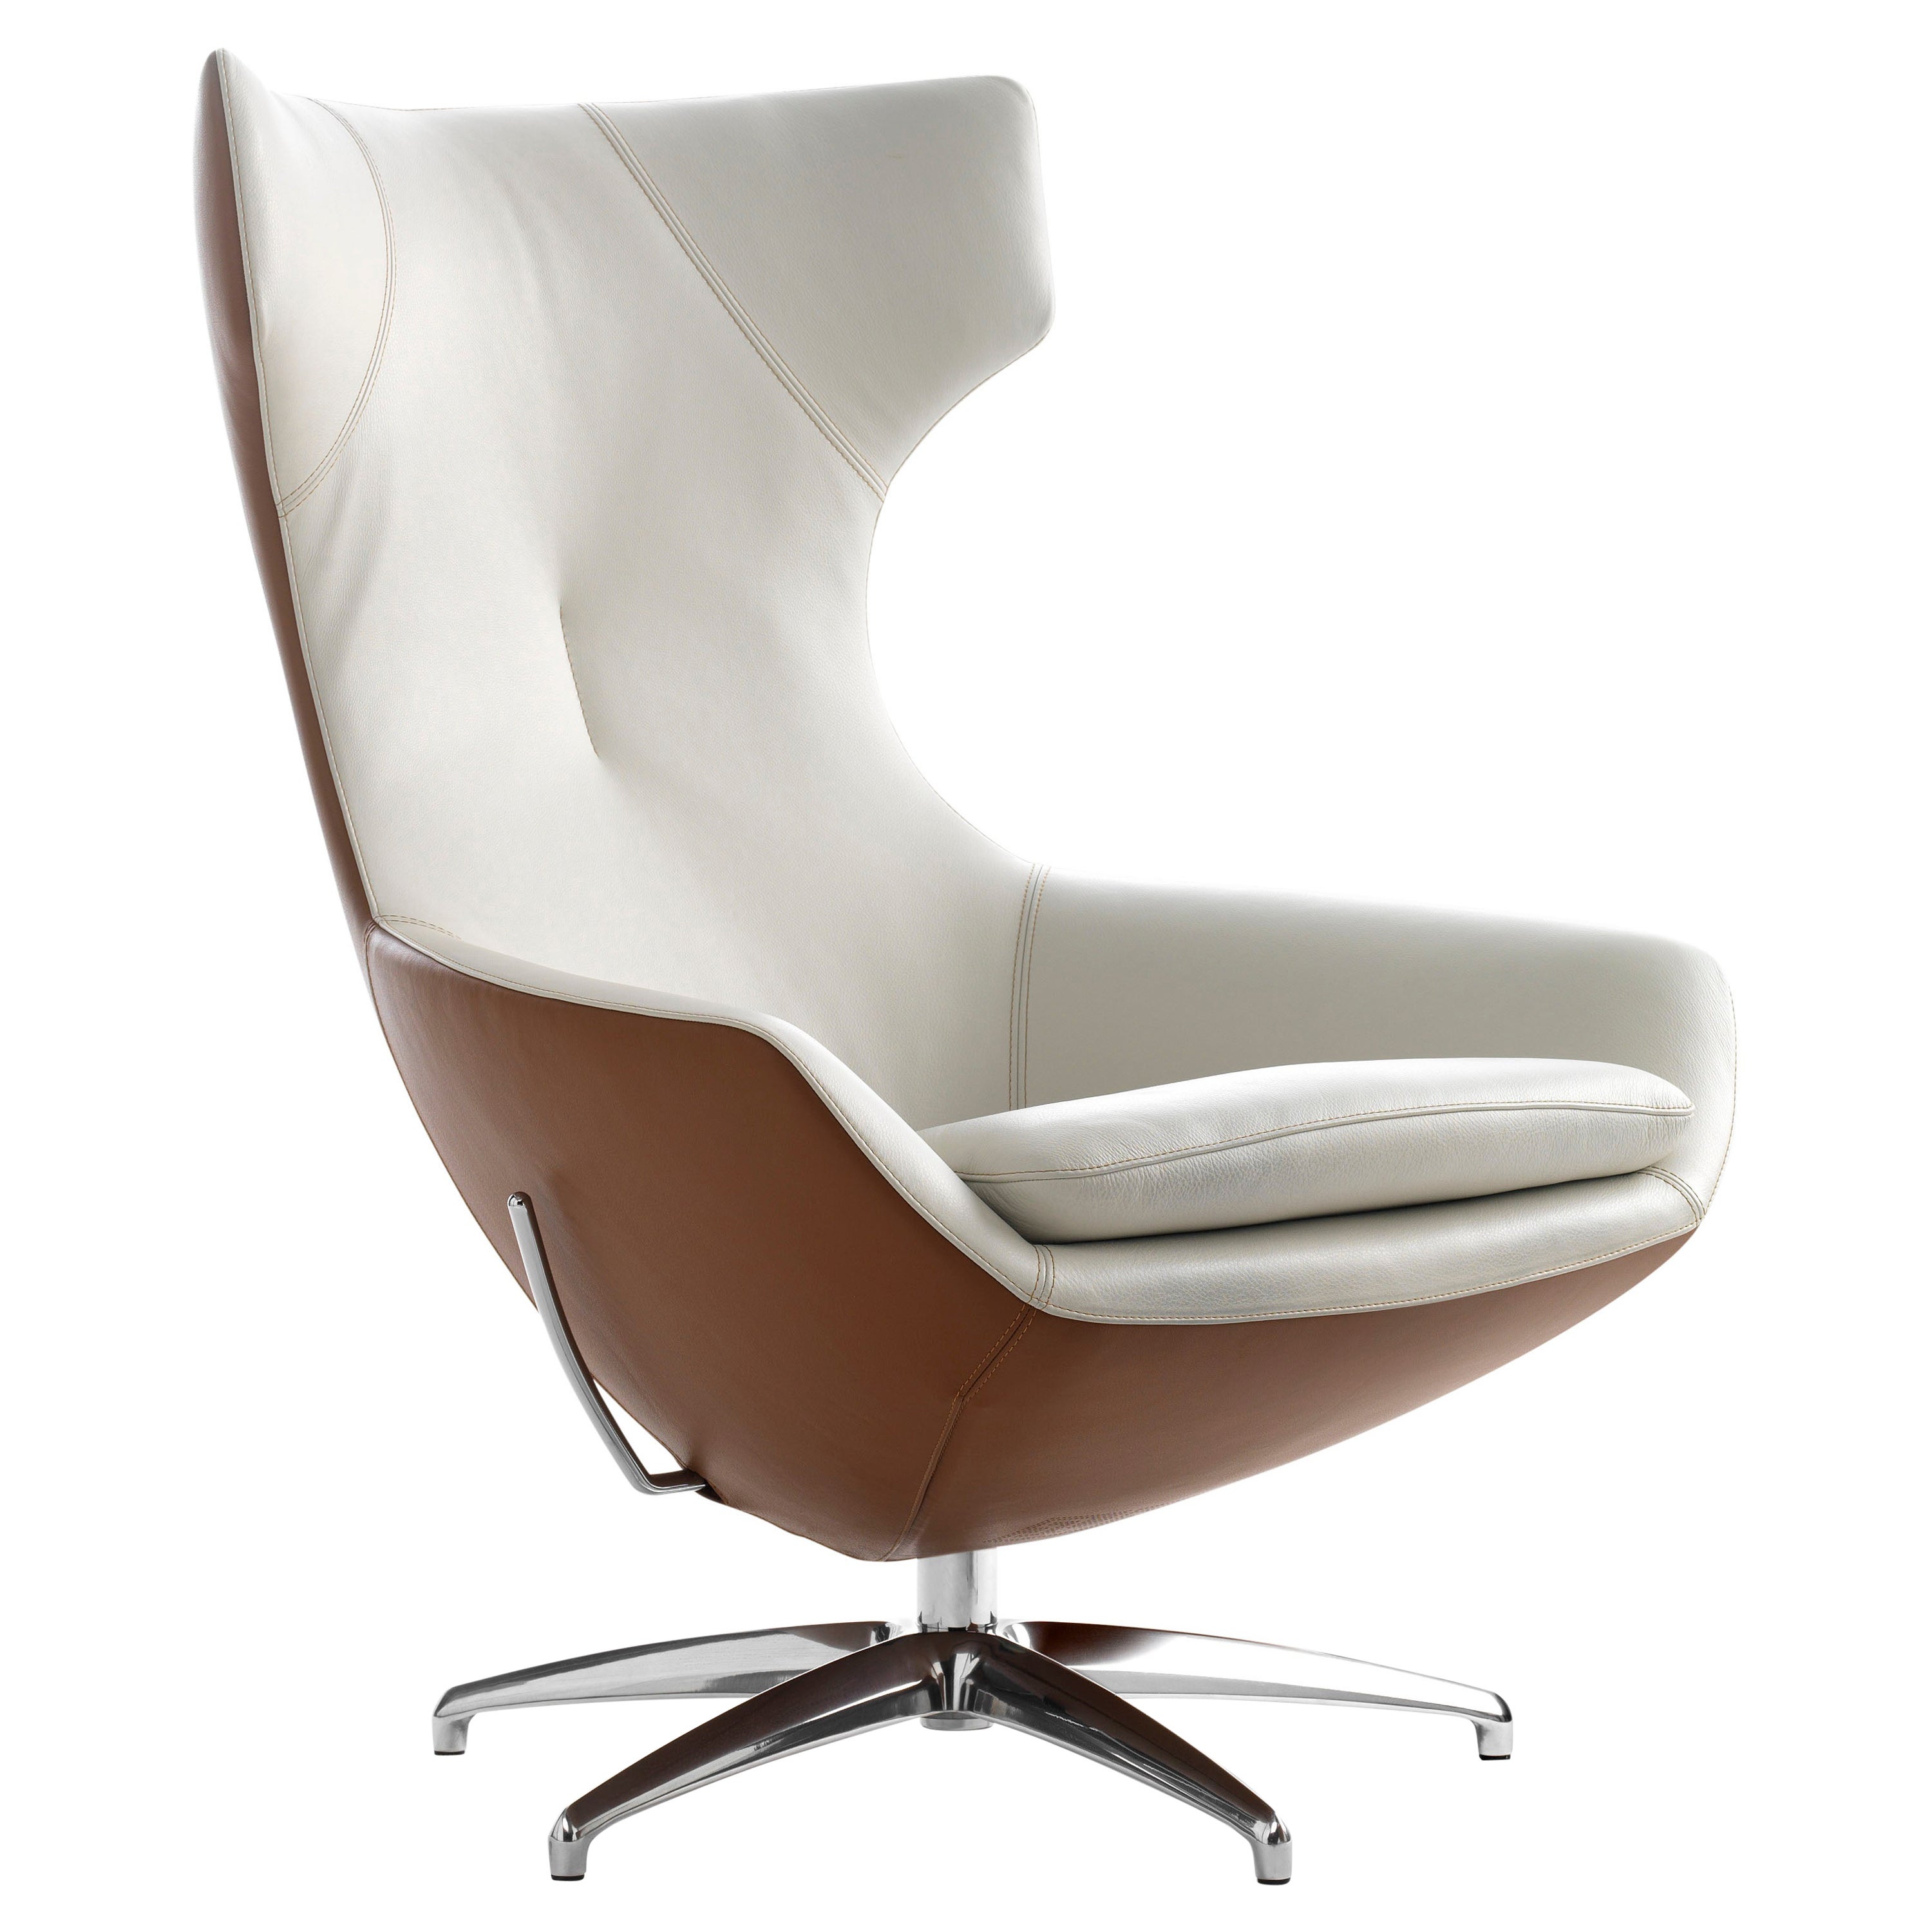 Caruzzo Lounge Chair by Leolux Upholstered in Two-Tone Leather For Sale